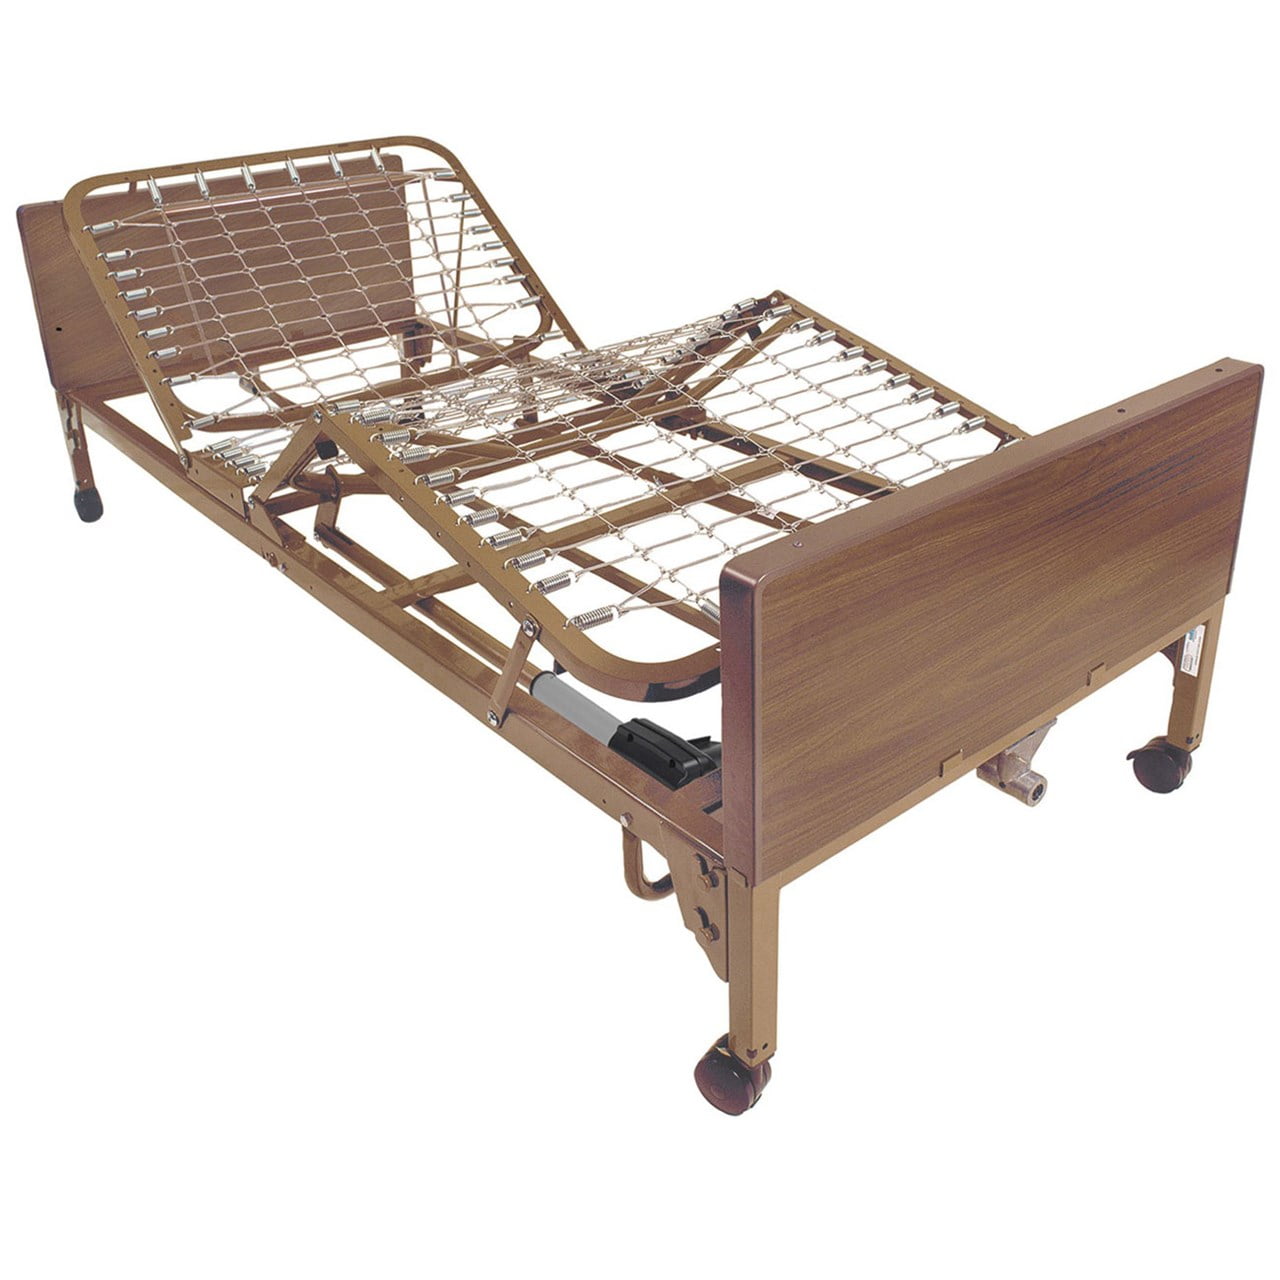 Luxury Multipurpose Jiecang Medical Hospital Bed Nursing Home Care Movable  Bed - Buy Multipurpose Hospital Bed,Movable Hospital Bed,Medical Nursing Bed  Product on Alibaba.com